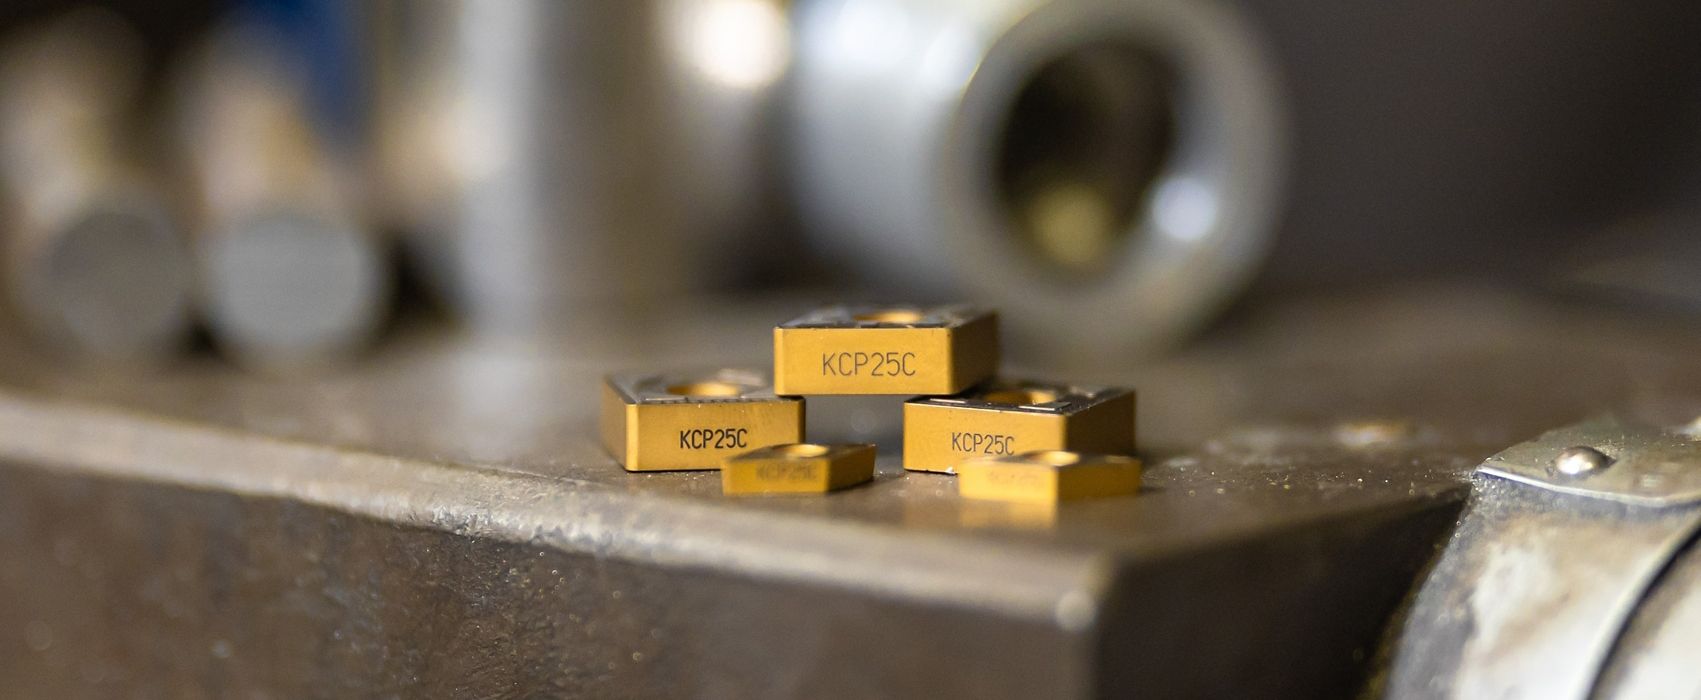 Learn More - Special Pricing on KCP25C Steel Turning Grade